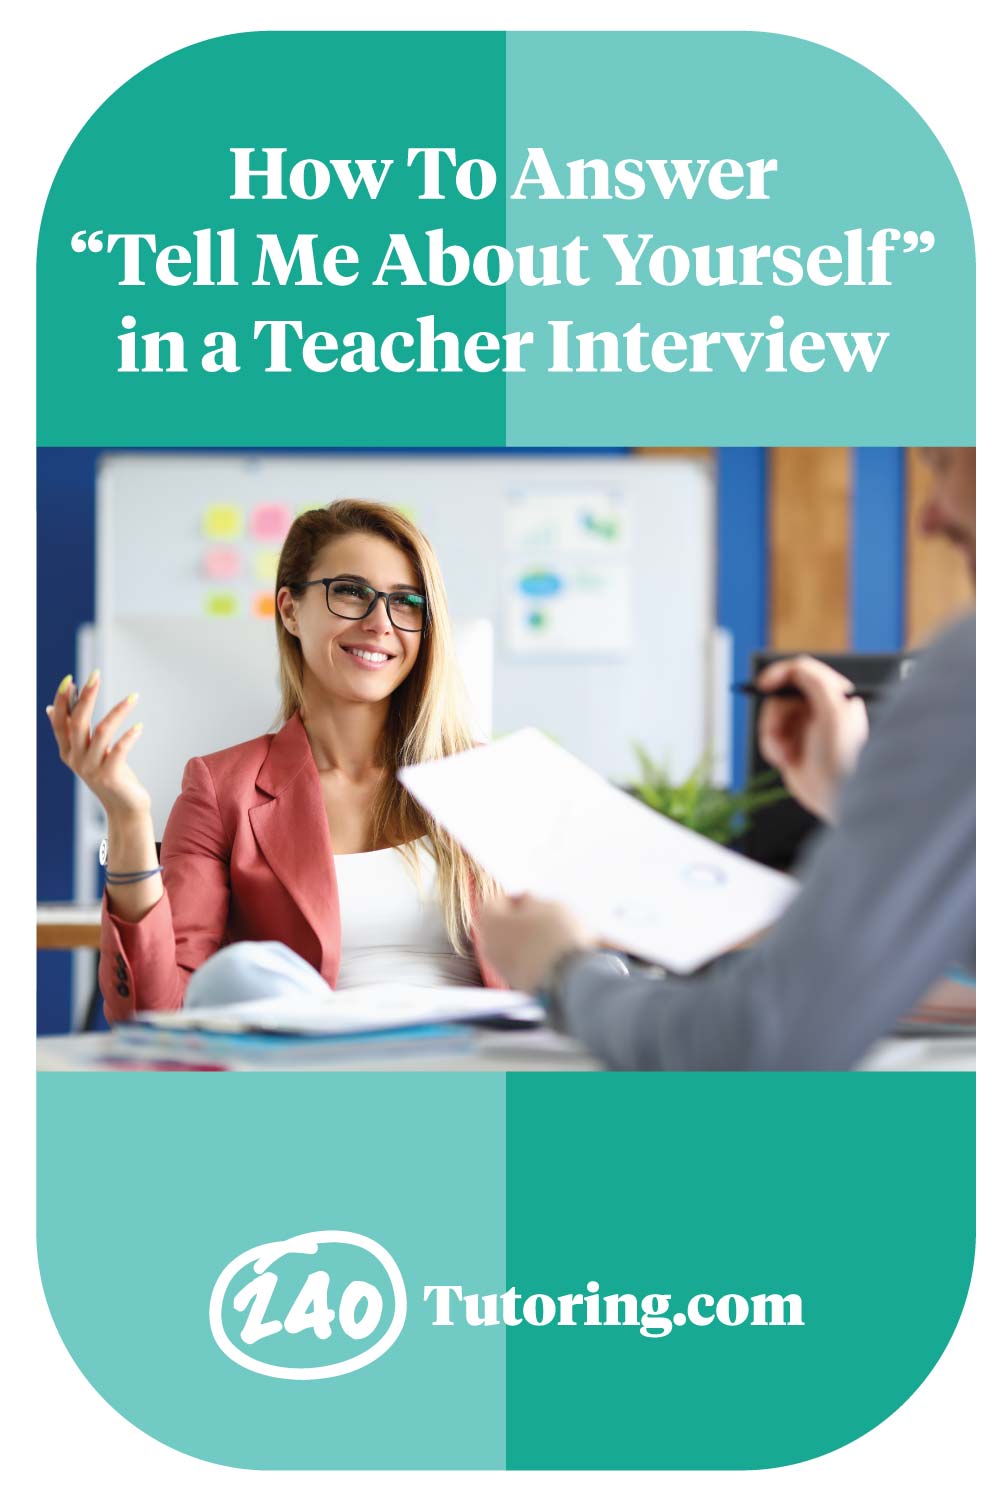 How To Answer Tell Me About Yourself in a Teacher Interview